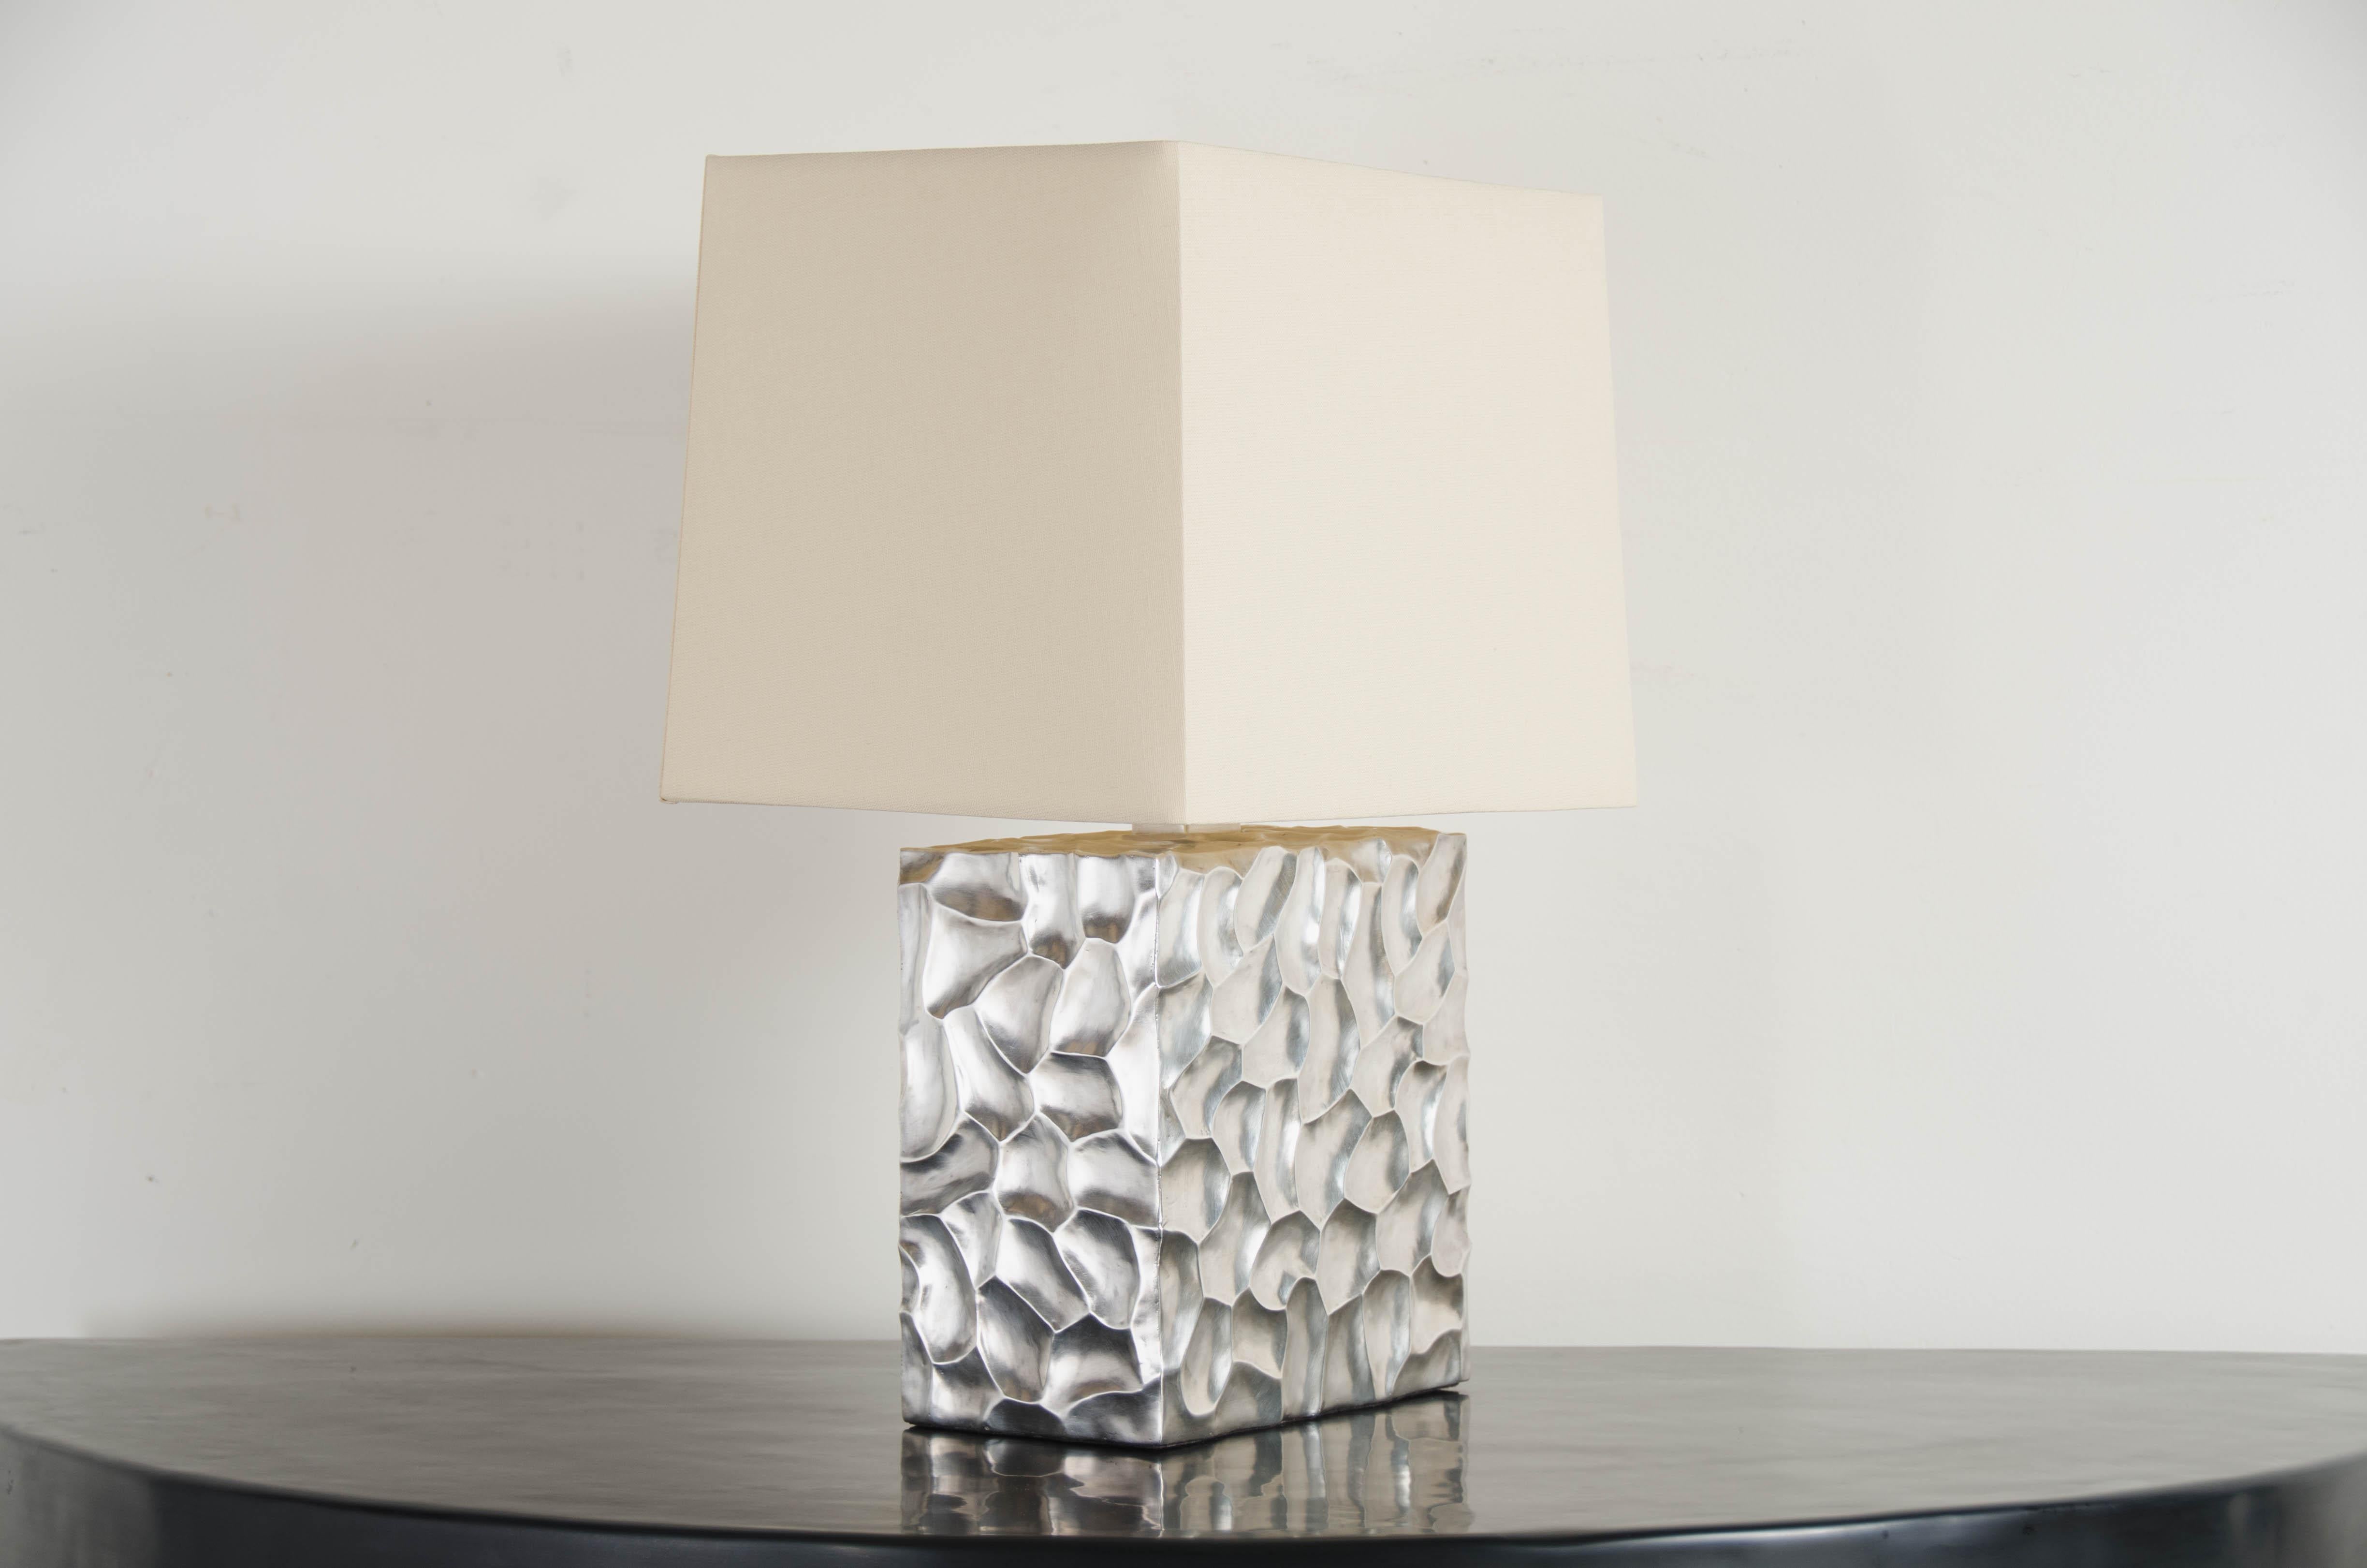 Rocco cube table lamp
Silver plated
Copper base
Hand repoussé
Limited edition
Natural linen shade
Each piece is individually crafted and is unique. 
Repoussé is the traditional art of hand-hammering decorative relief onto sheet metal. The